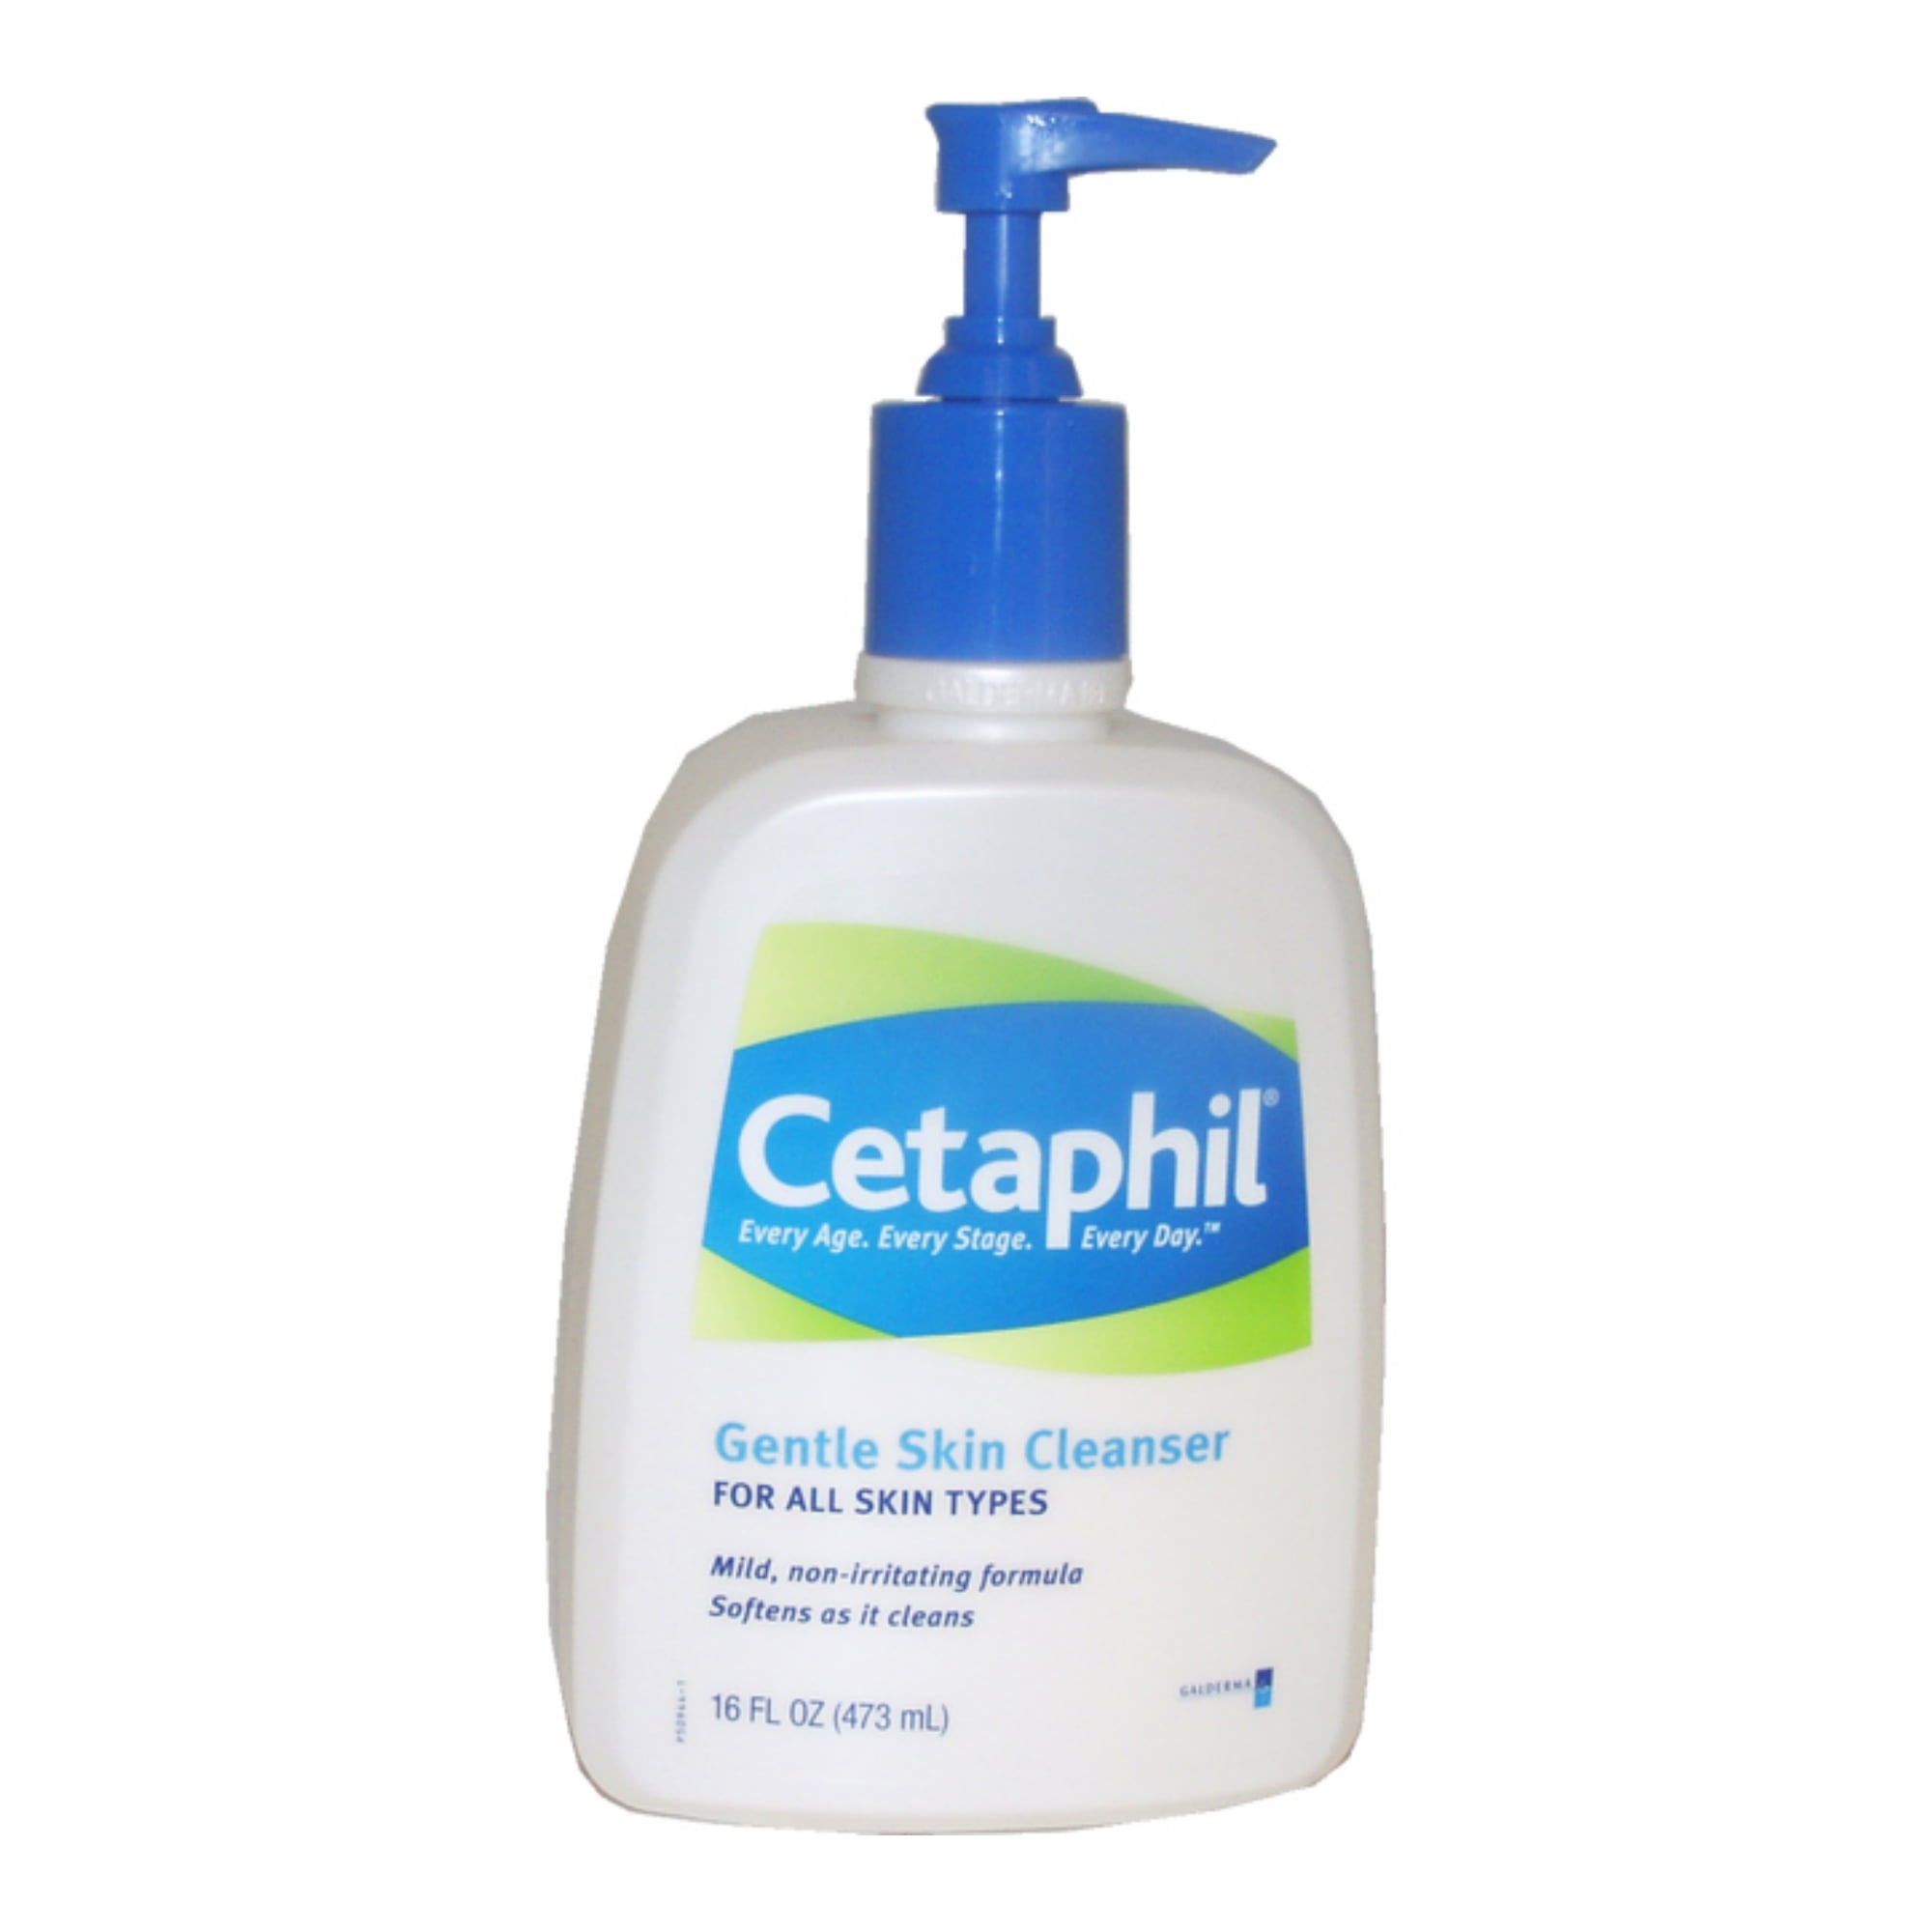 Gentle Skin Cleanser by Cetaphil for Unisex